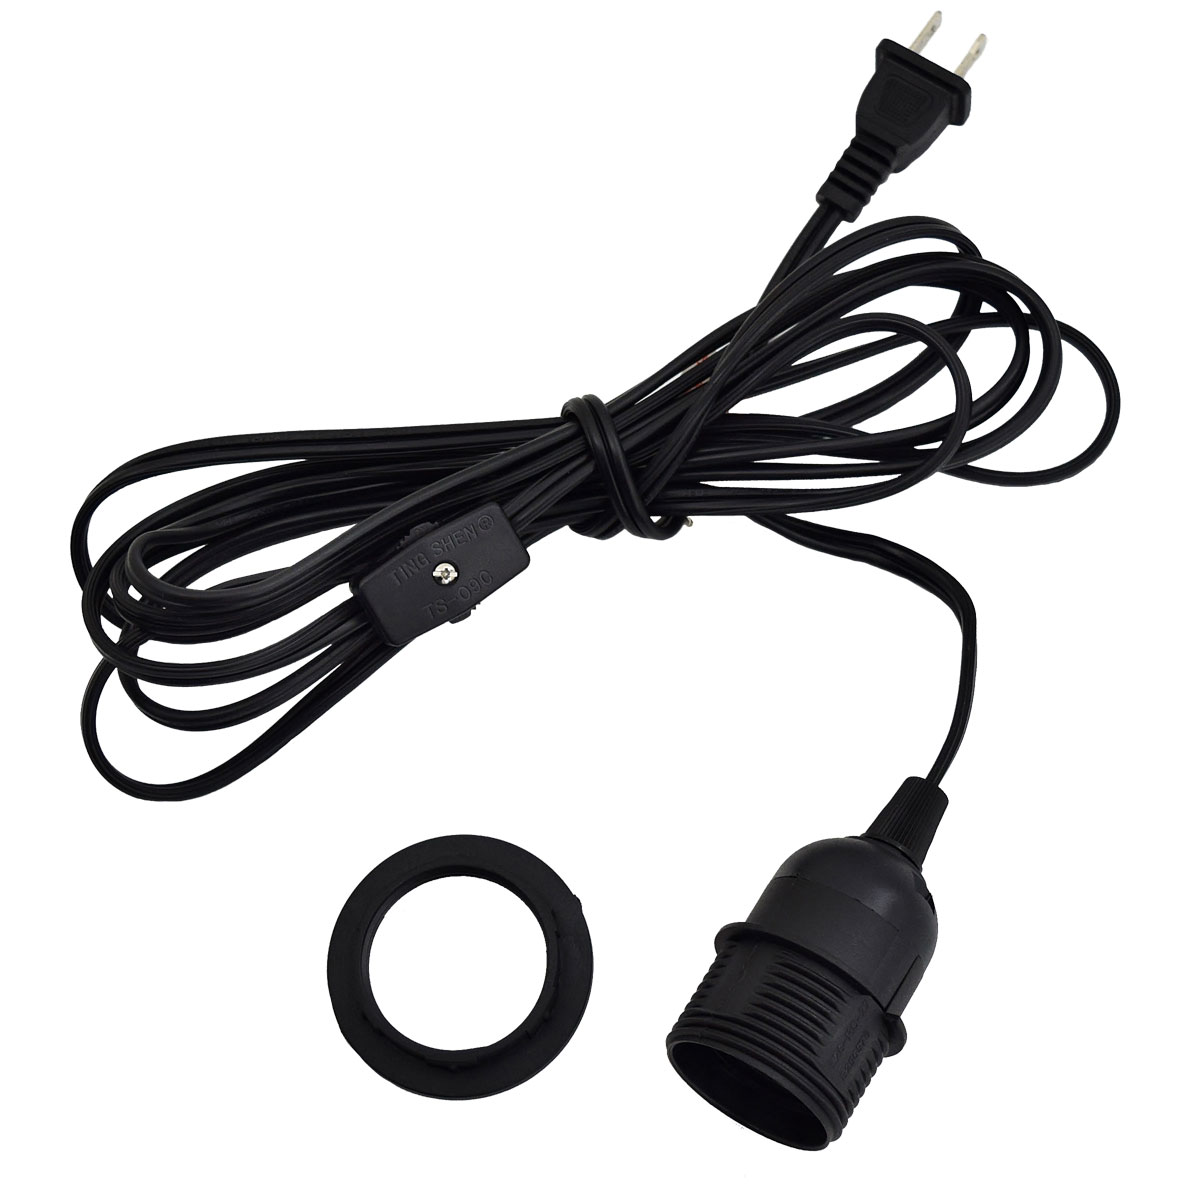 Outdoor extension cord uk